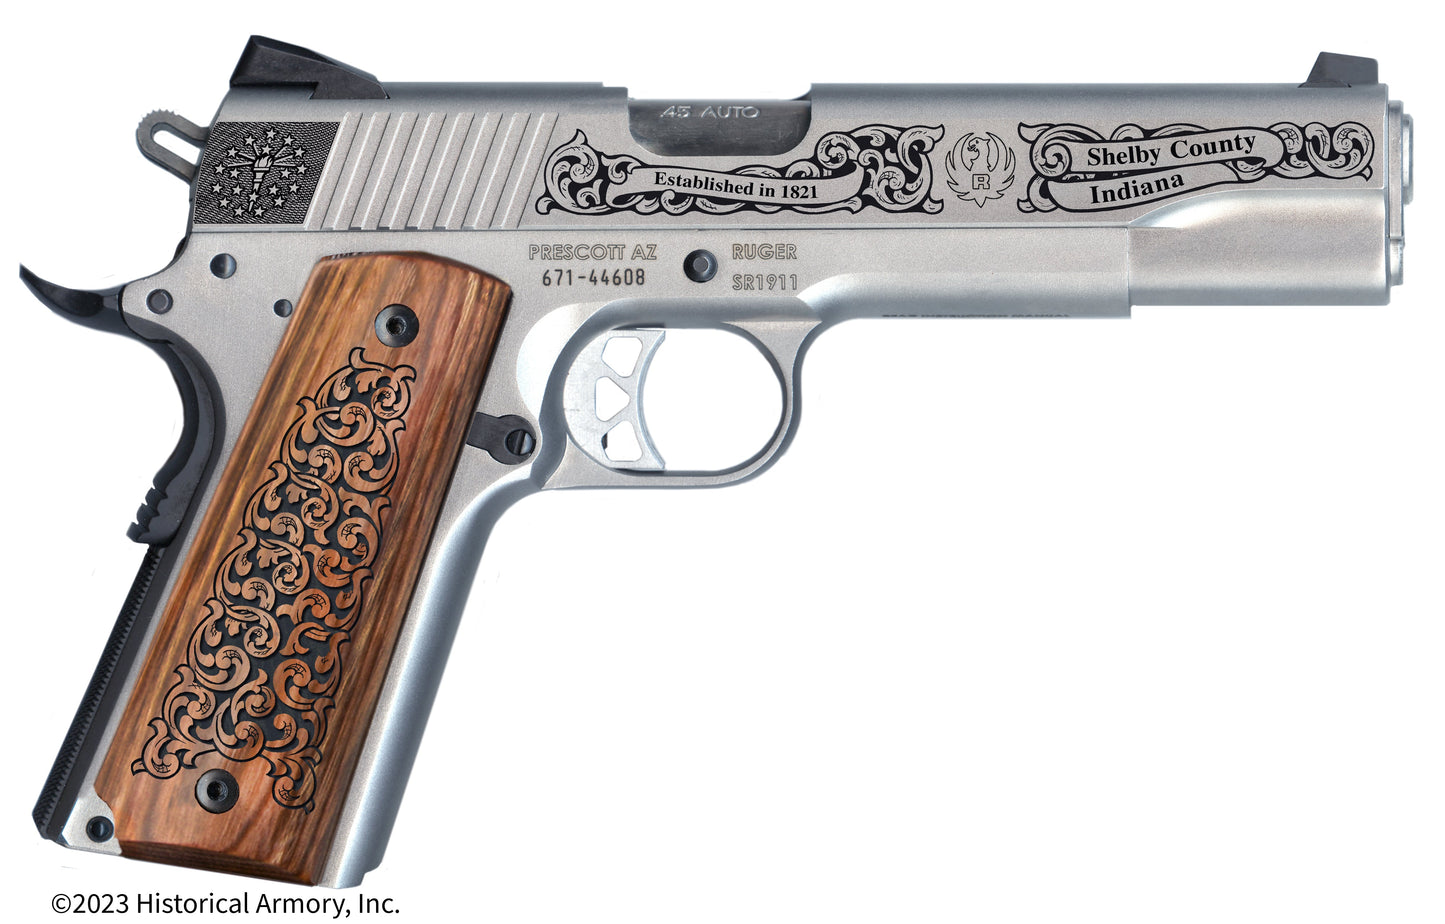 Shelby County Indiana Engraved .45 Auto Ruger 1911